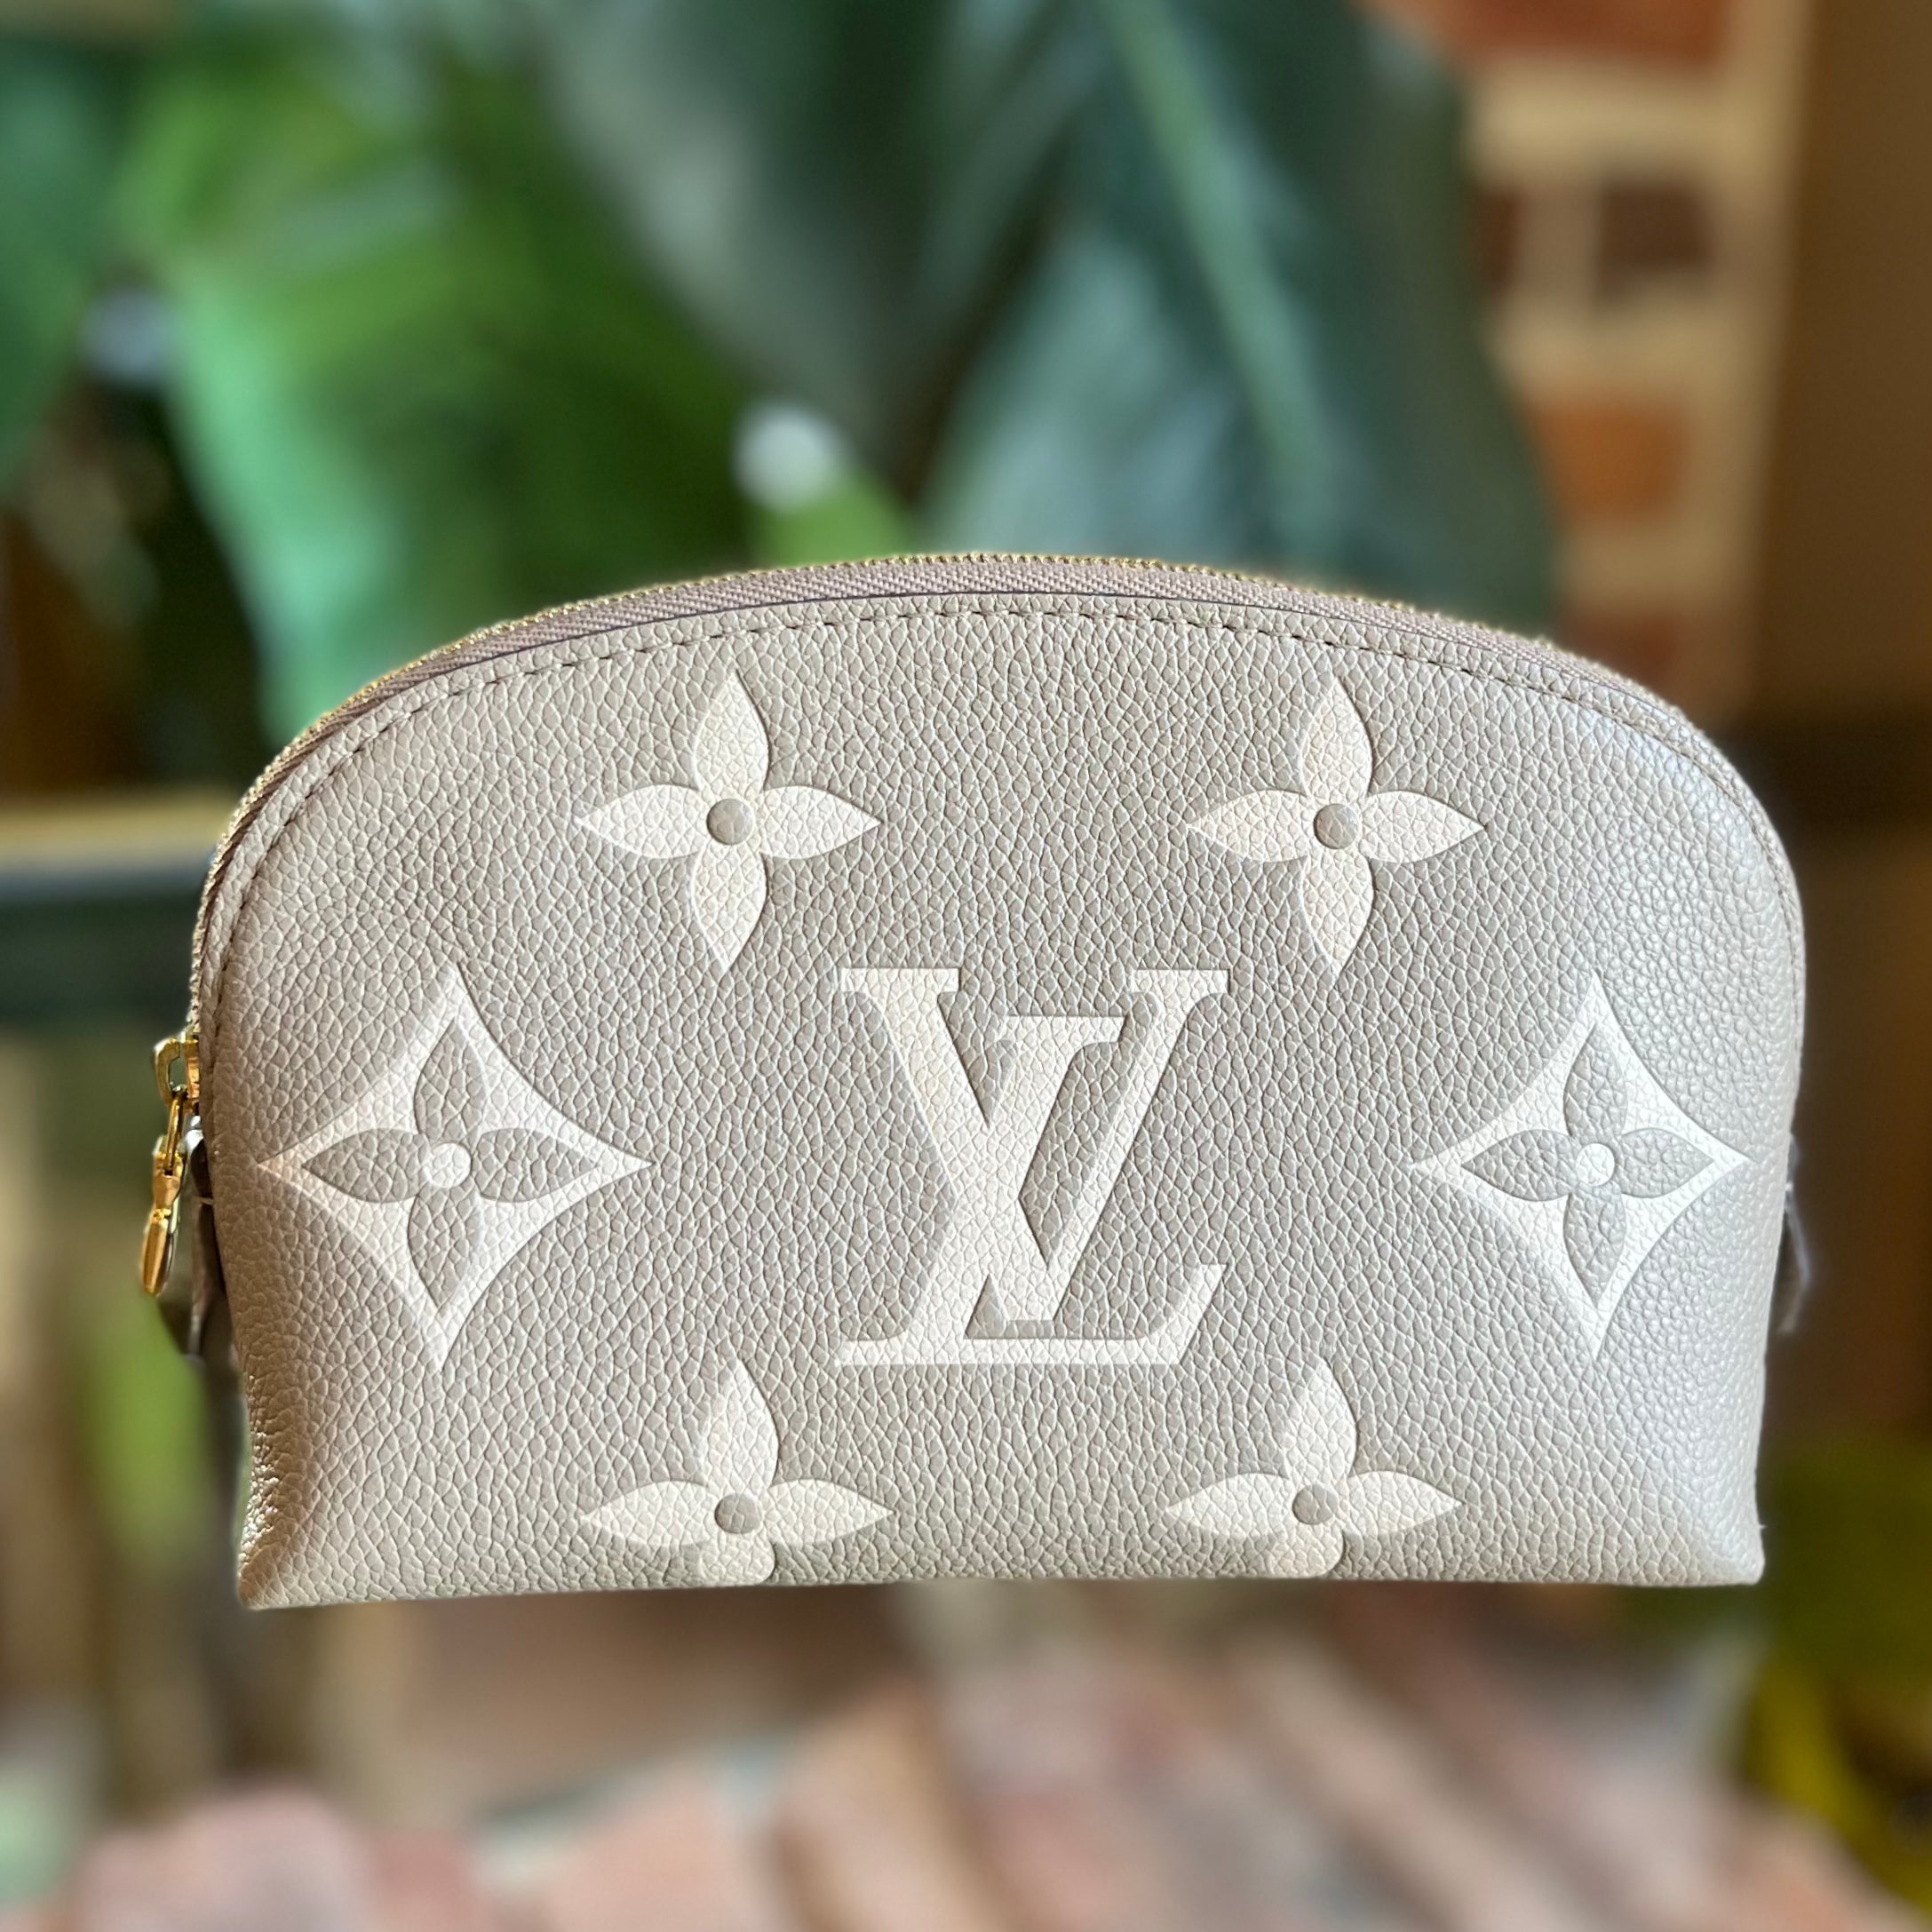 Louis Vuitton Lv Crafty Cosmetic Pouch Pm